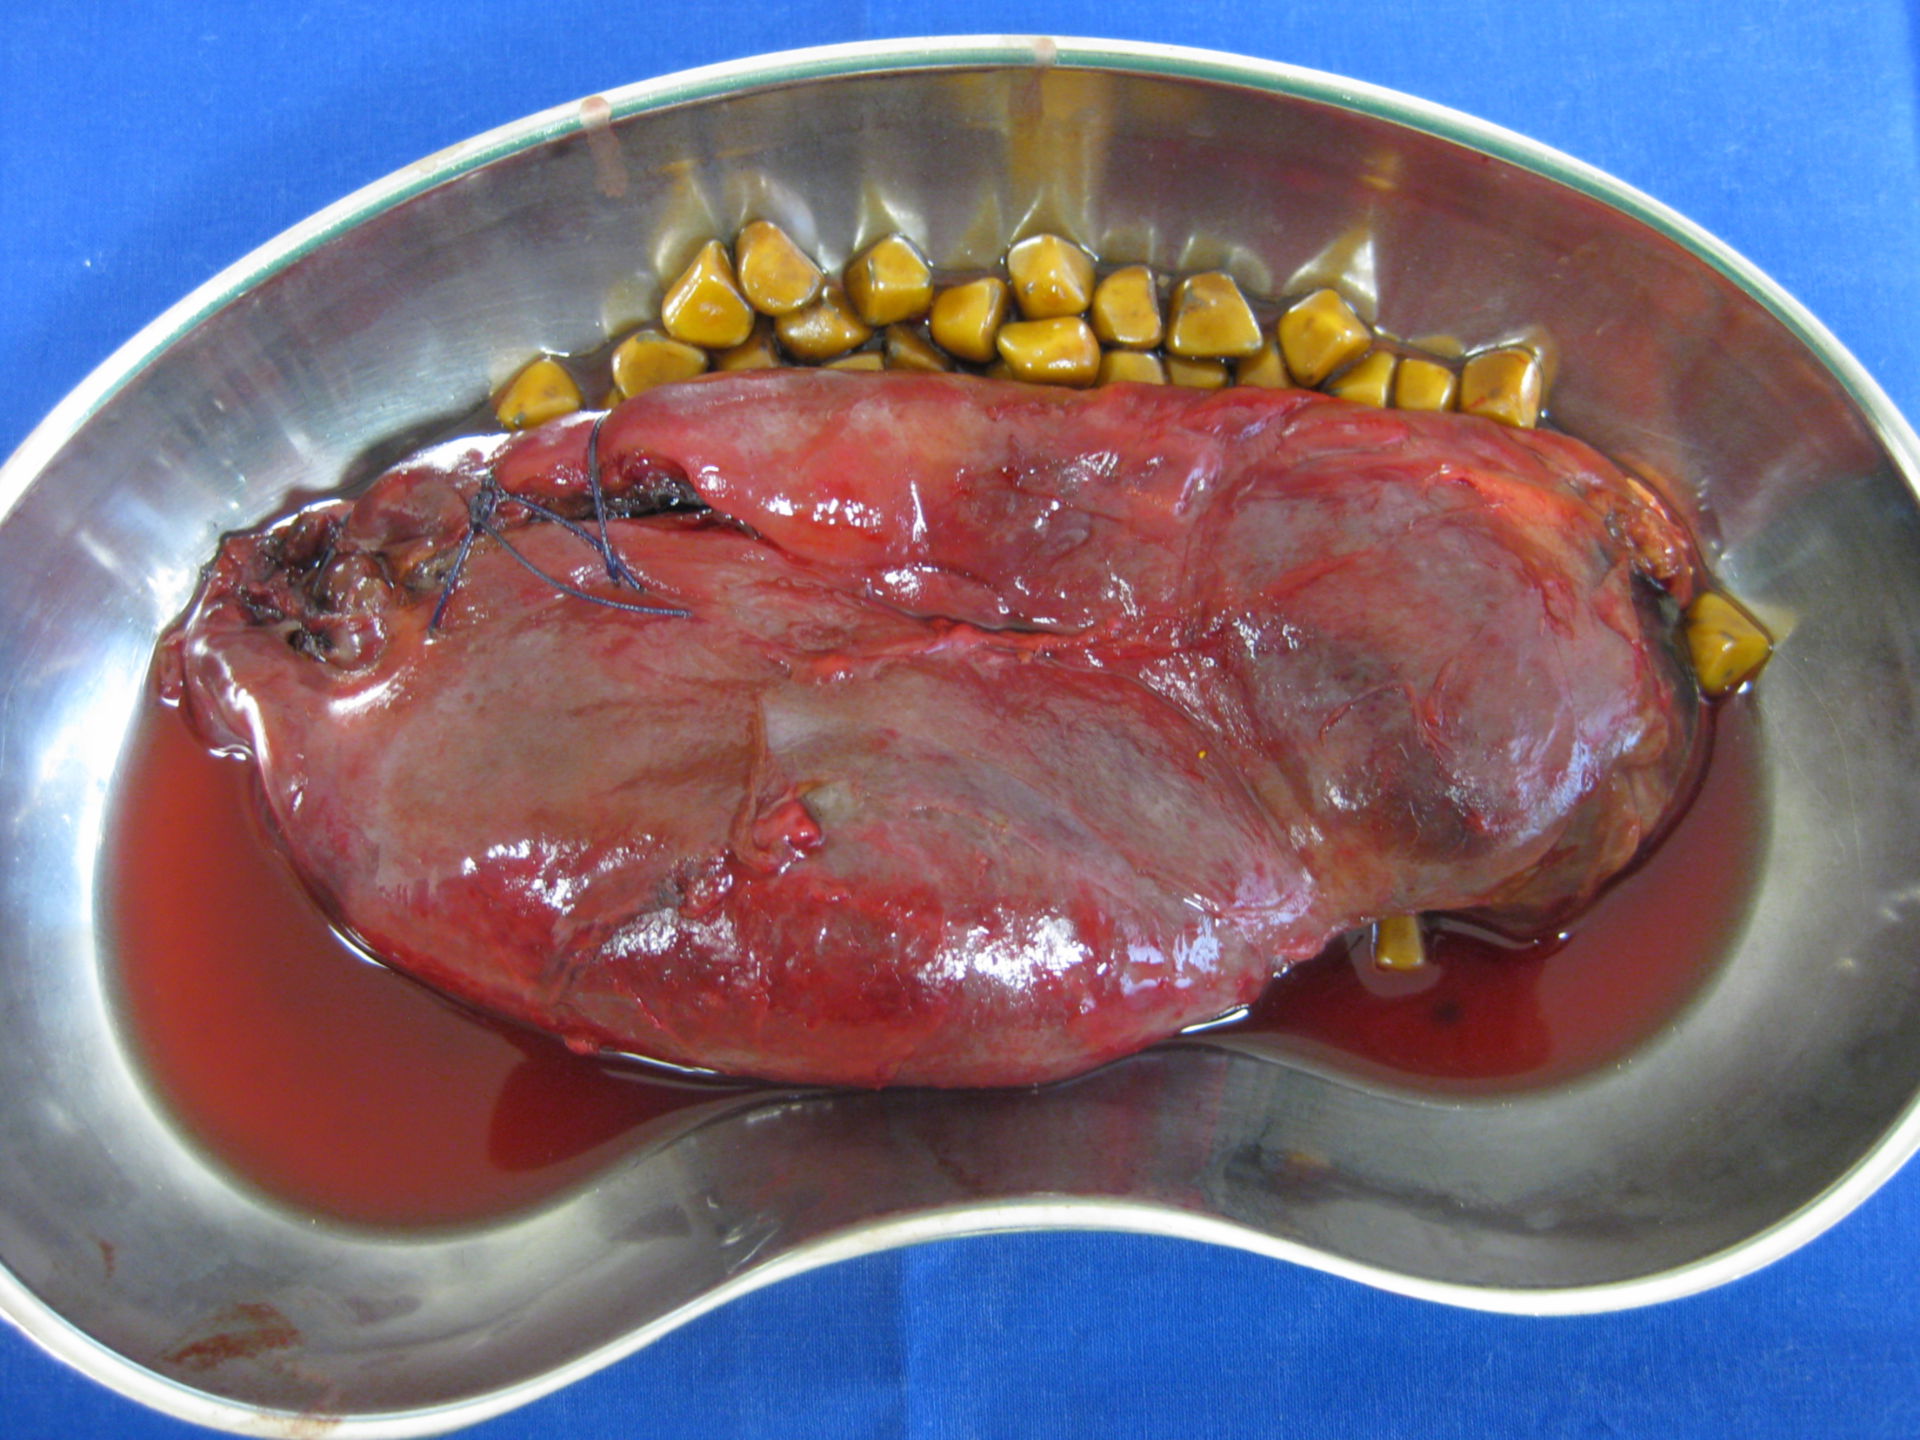 Acute cholecystitis - gall bladder the size of a stomach